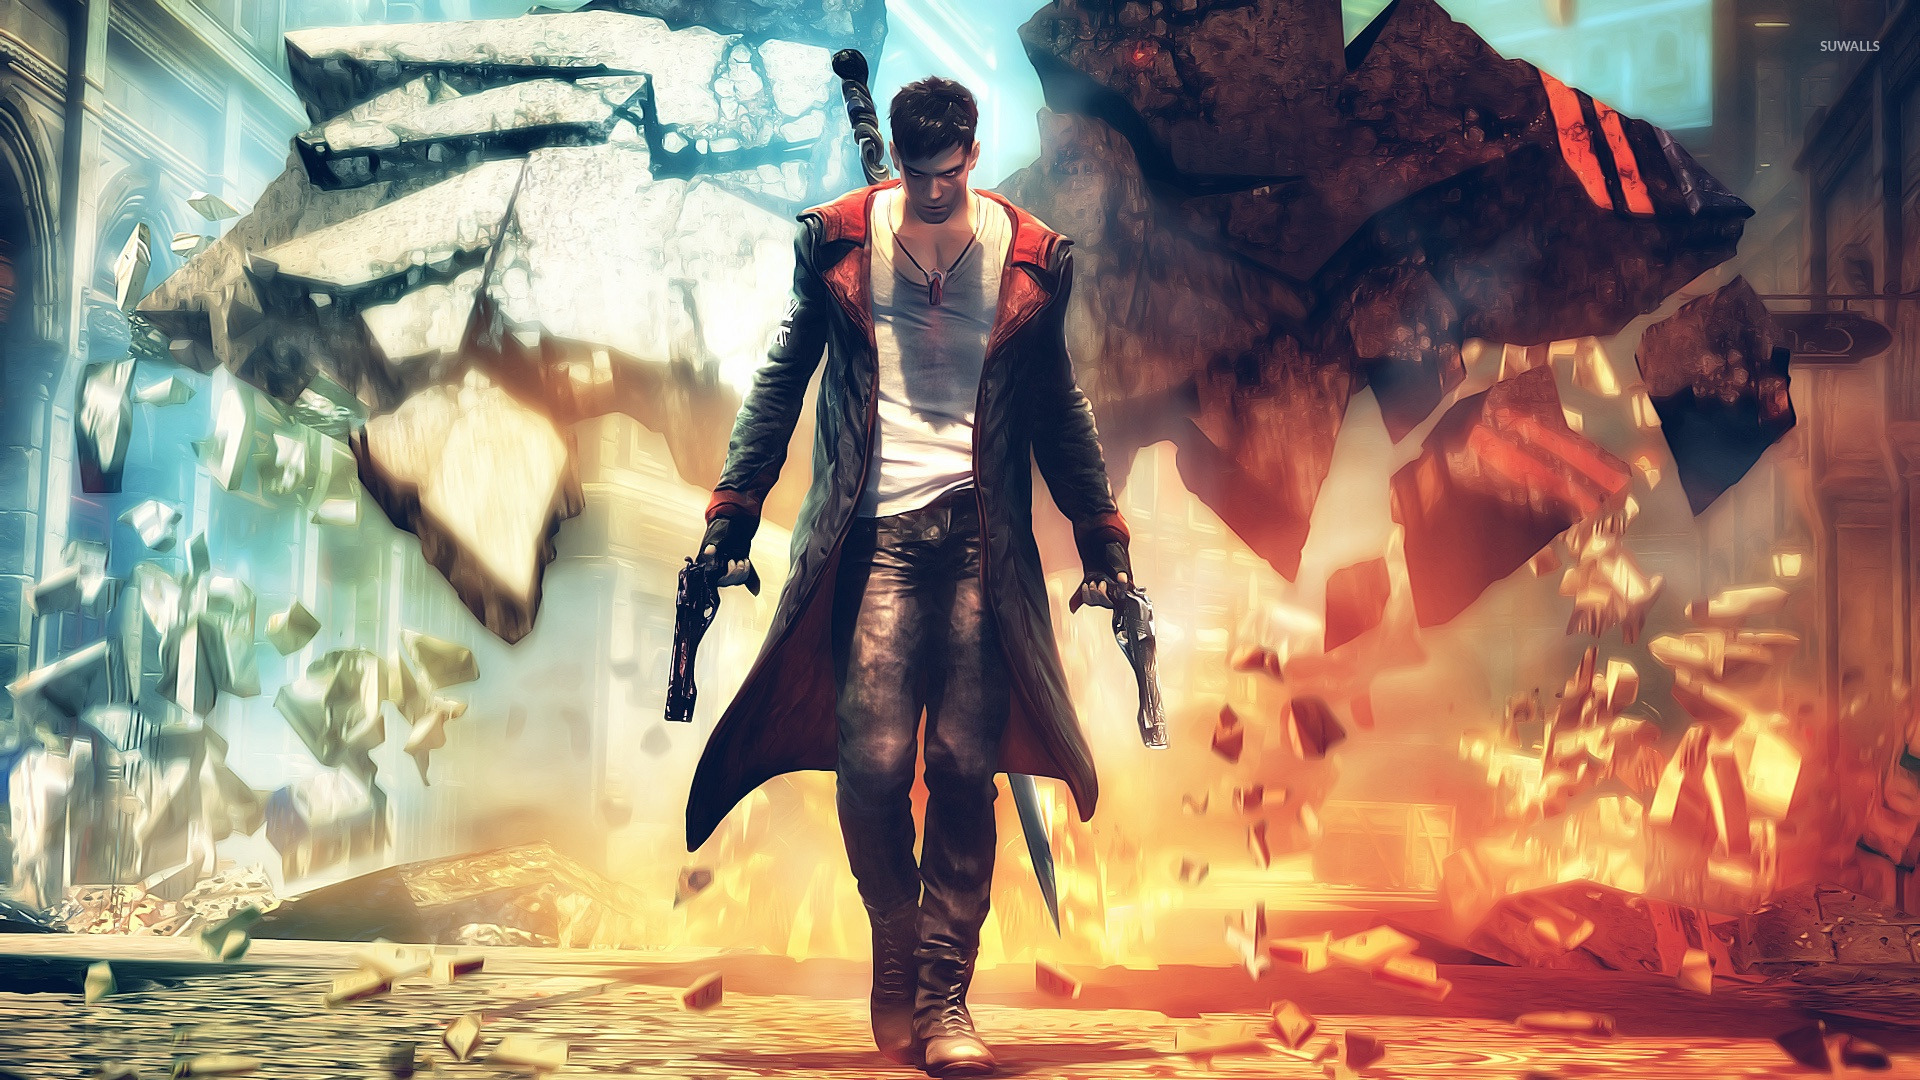 Dante   Devil May Cry 5 wallpaper   Game wallpapers   15652 1920x1080